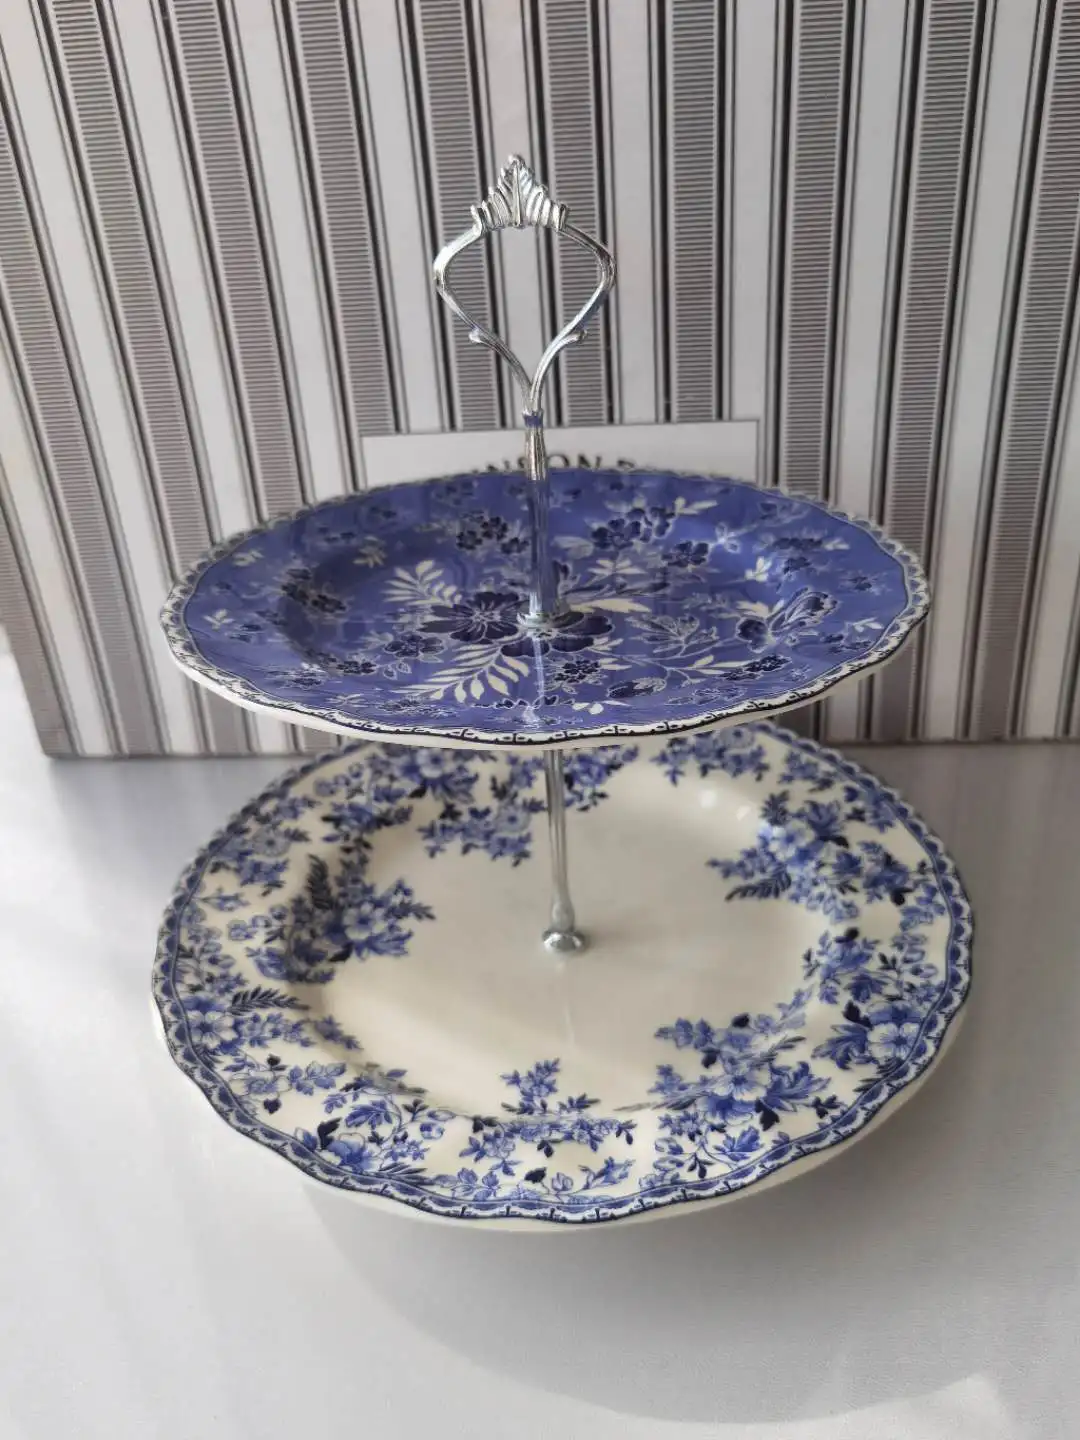 british-classic-devonshire-blue-and-white-series-double-layer-cake-plate-8-105-inches